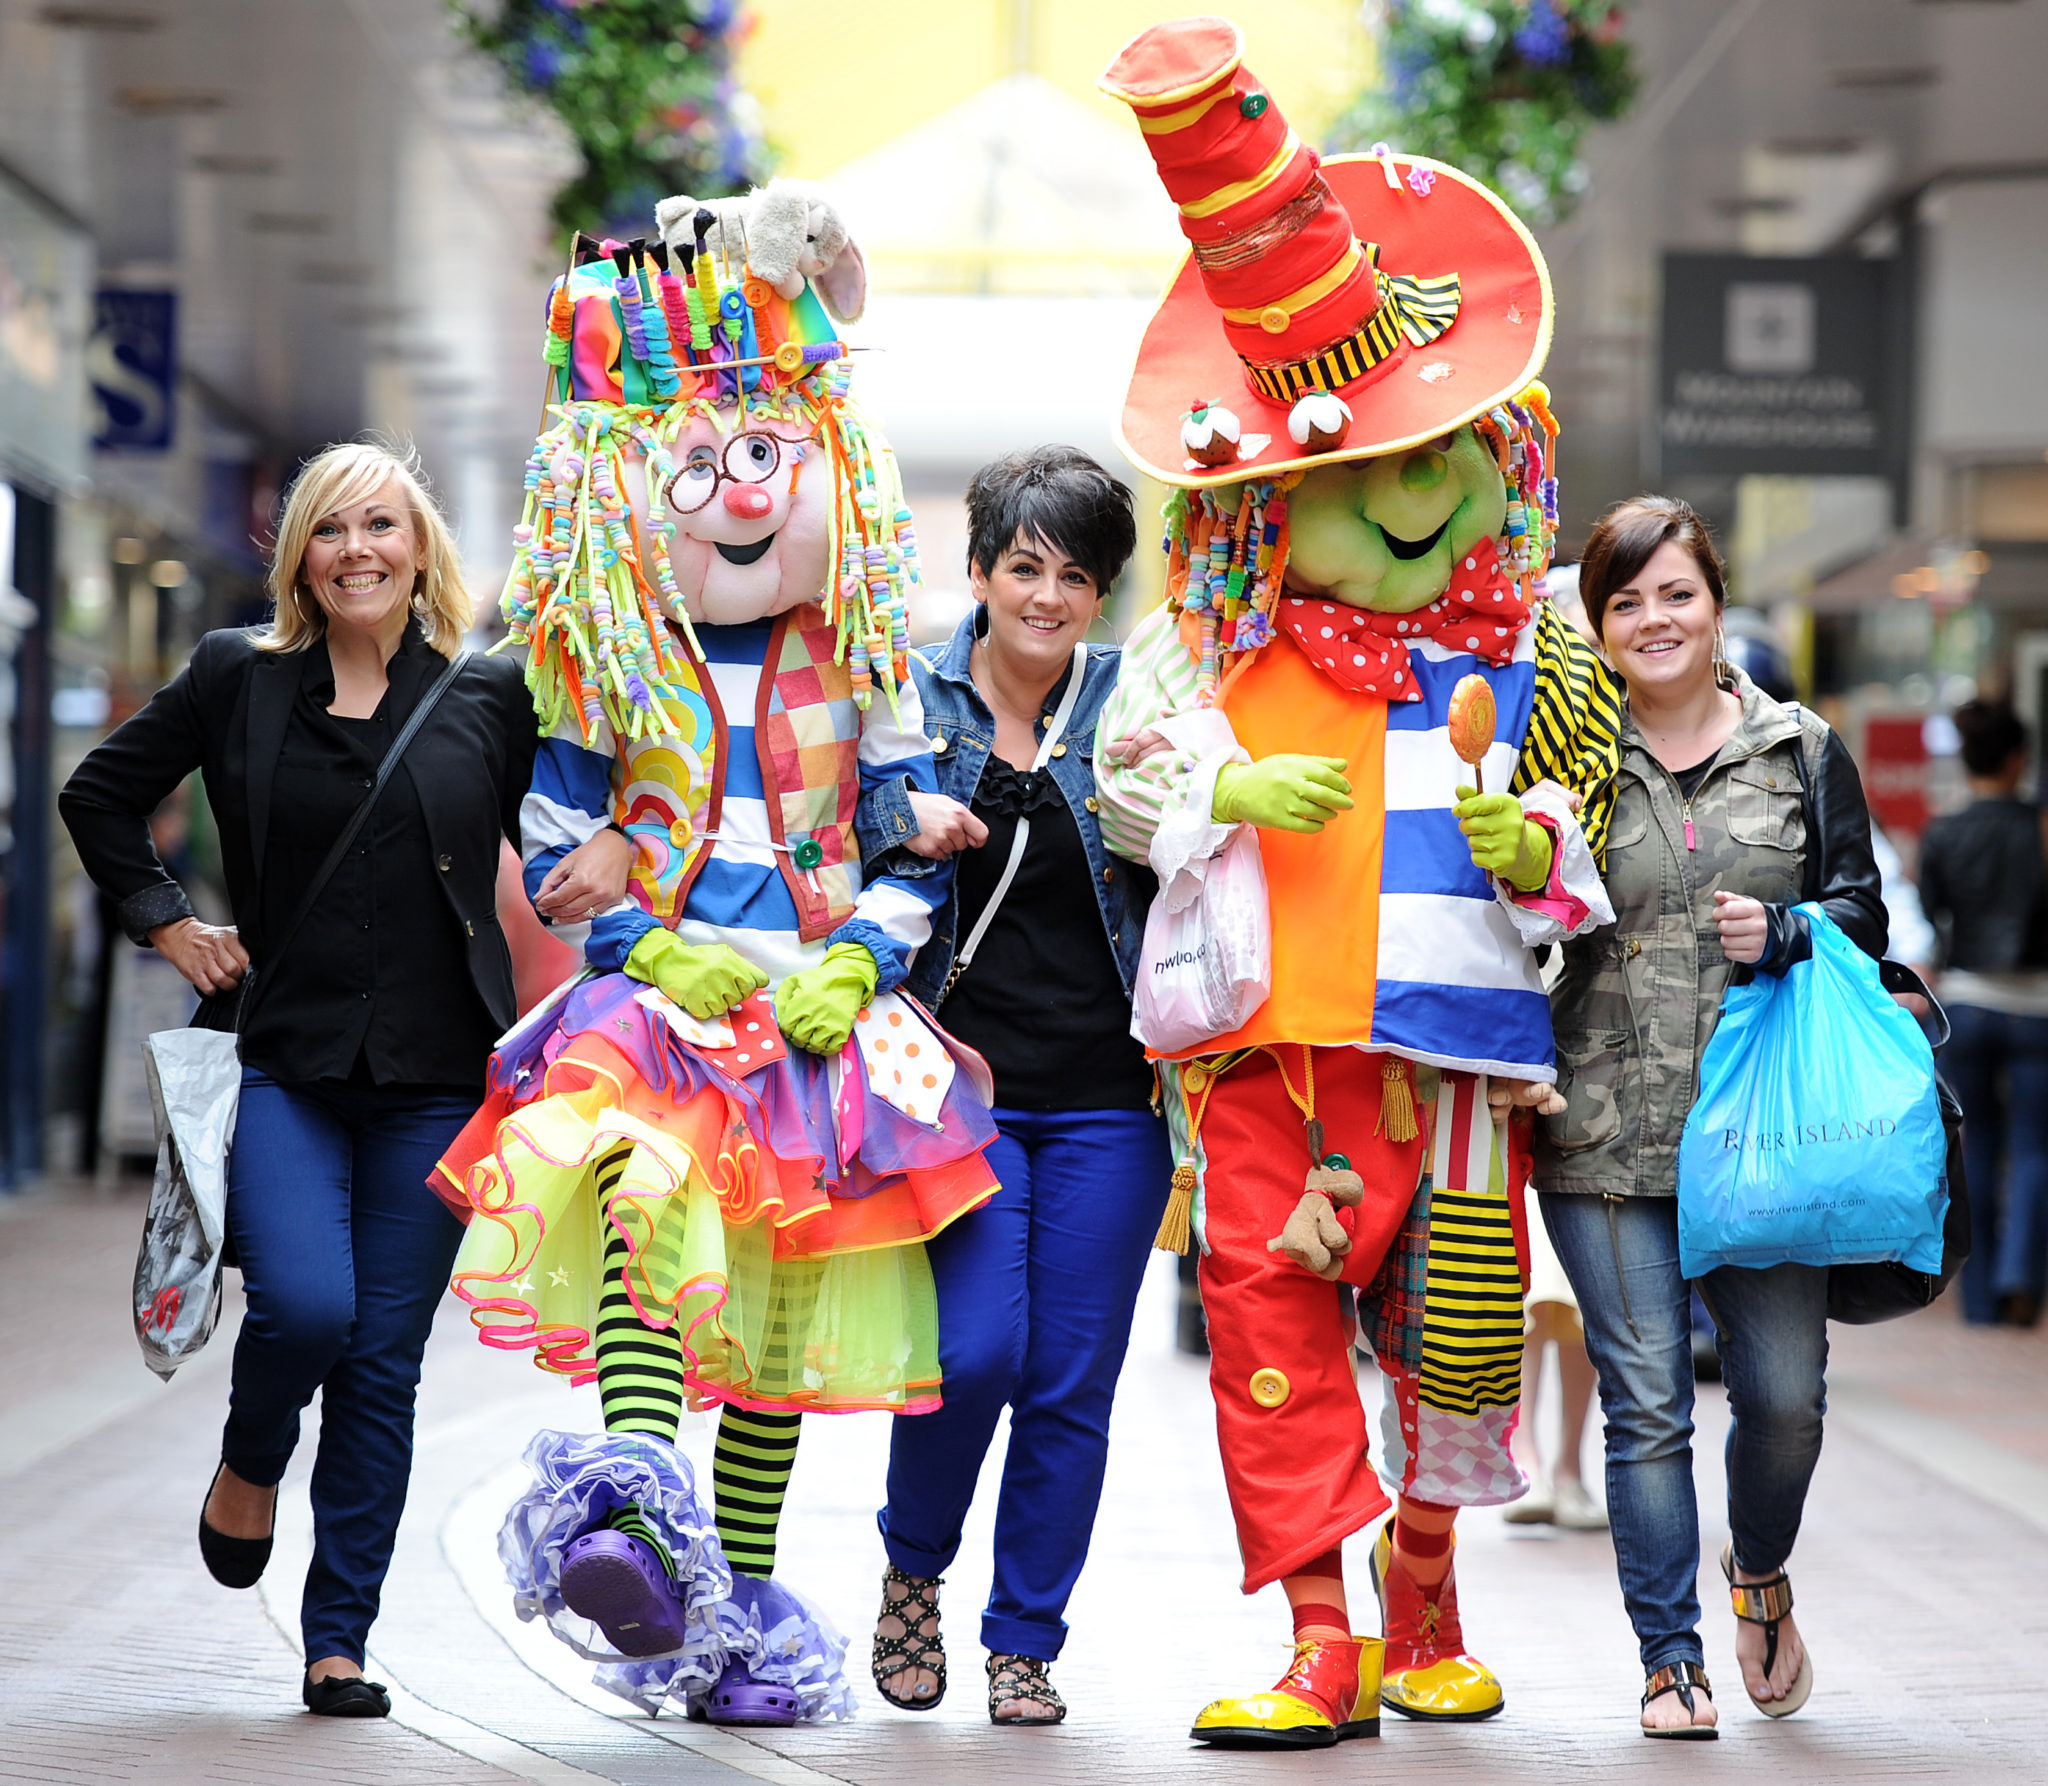 The event mascots with shoppers (l to r) Carolyn Martin, Celestina Ames and Layla Setterlund